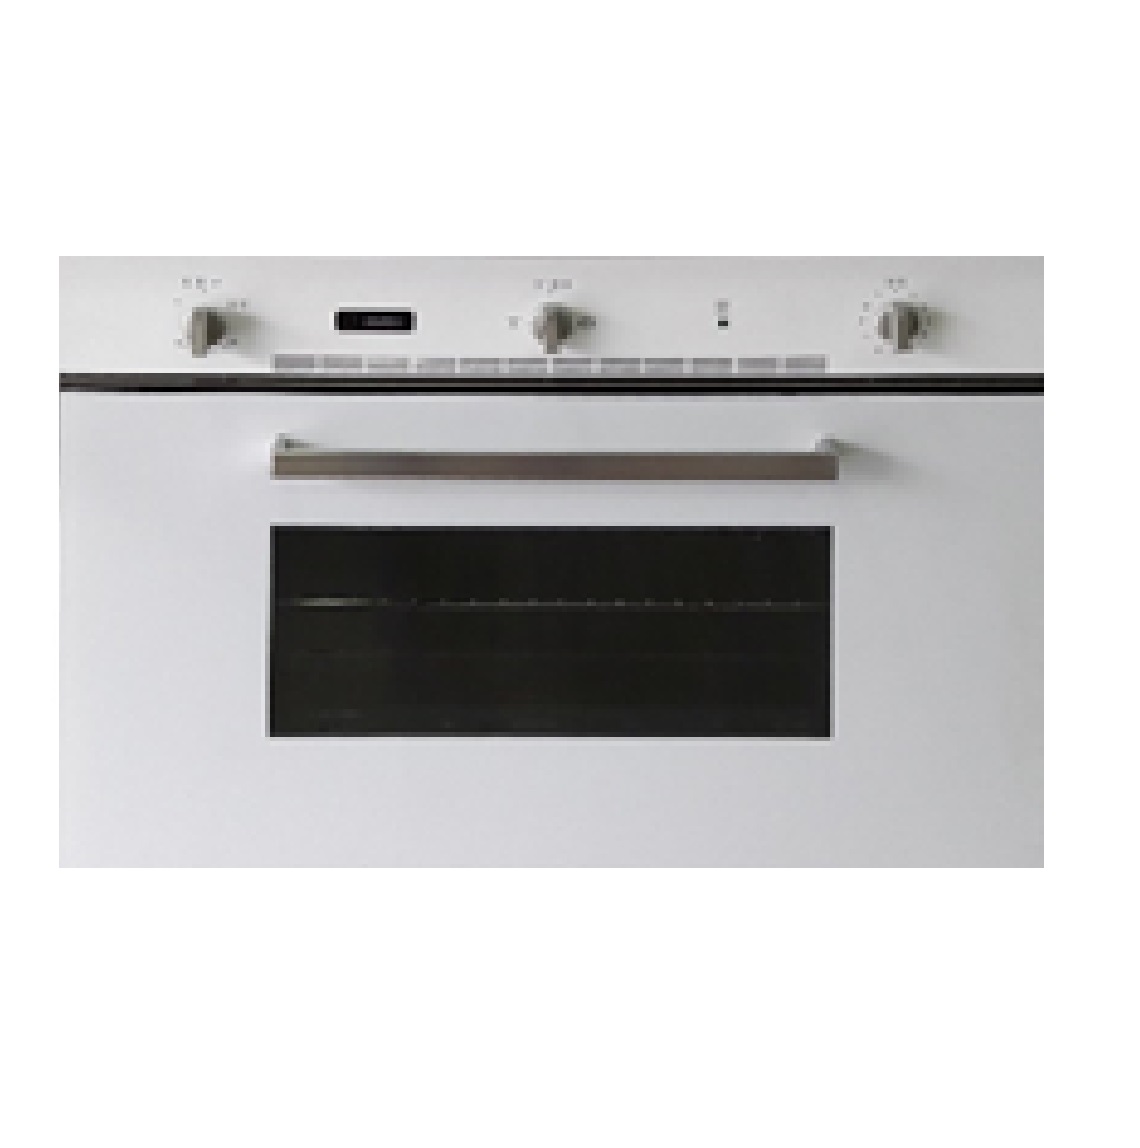 Famos Oven Large Gas Gas Oven Inox 90 cm  White     